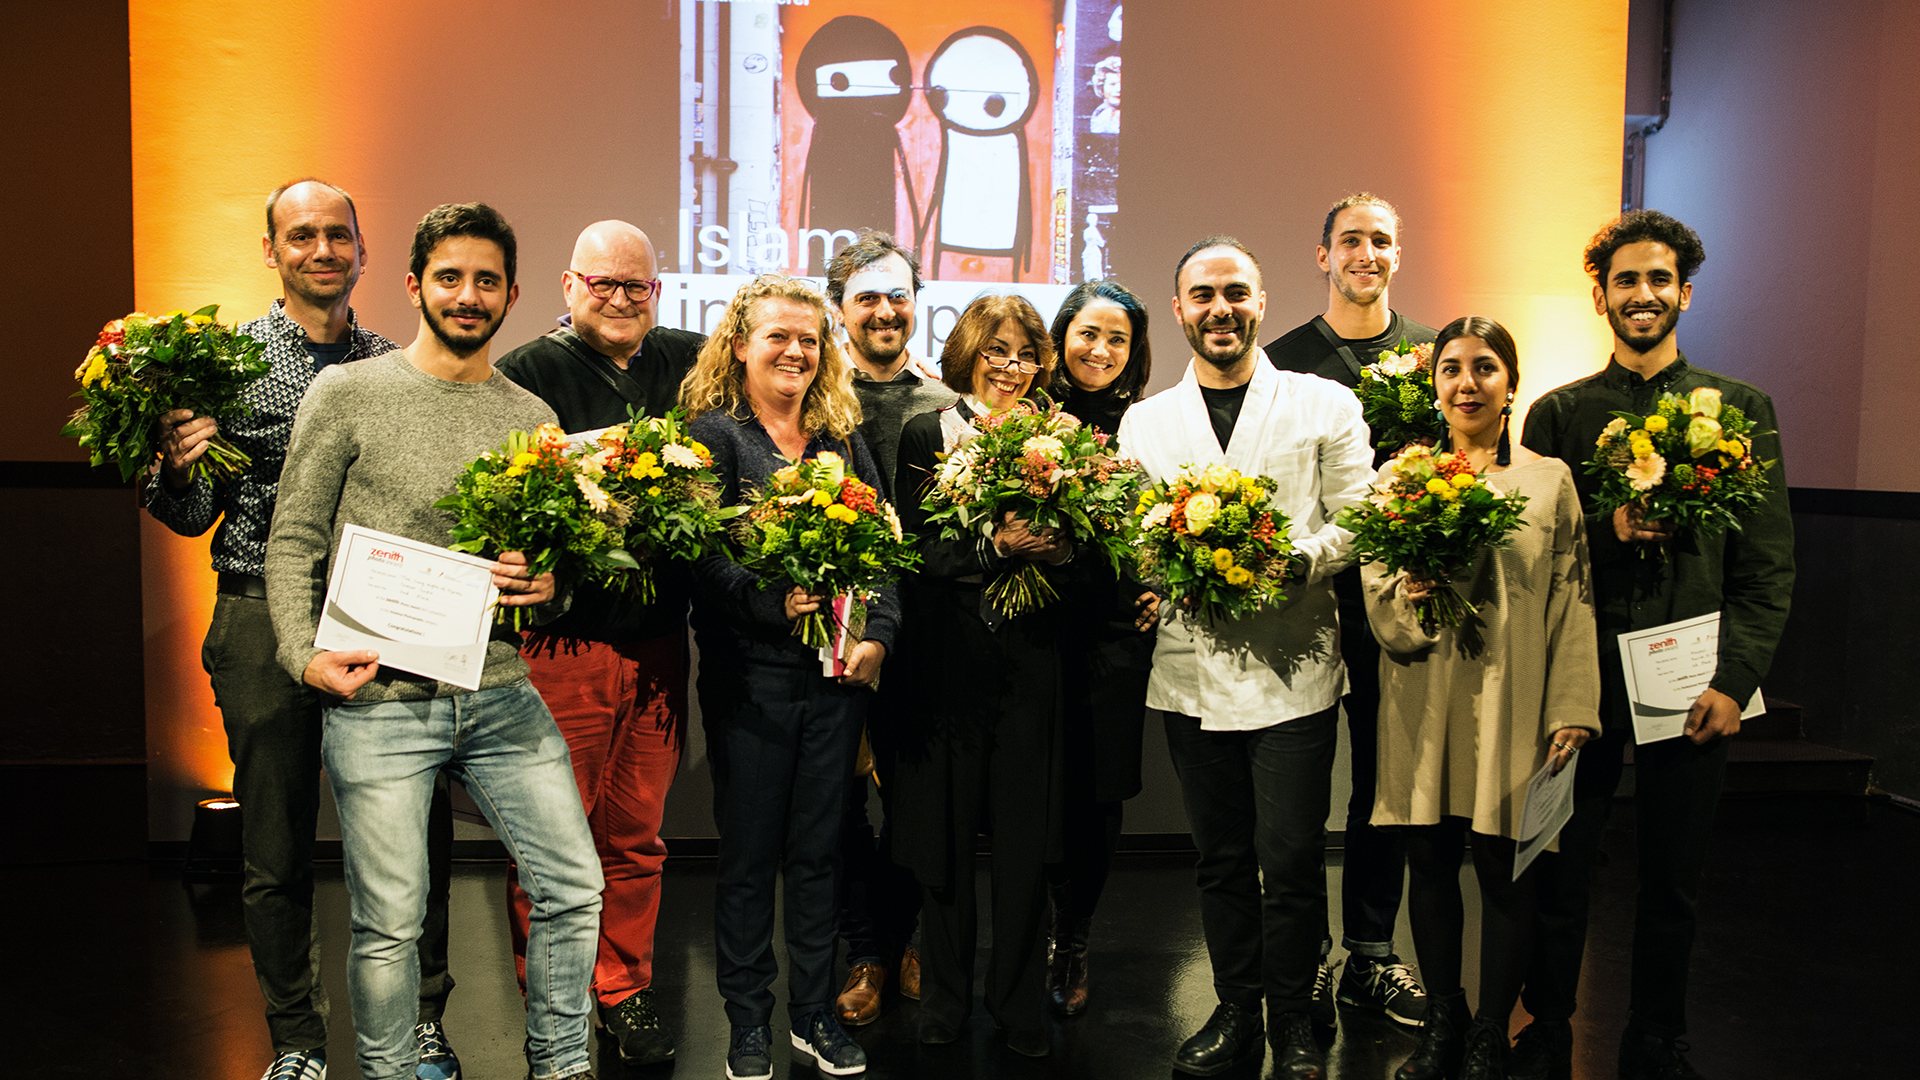 Shortlisted photographers and jury members at the award ceremony 15 November 2017 at the Museum at the Kulturbrauerei in Berlin. 